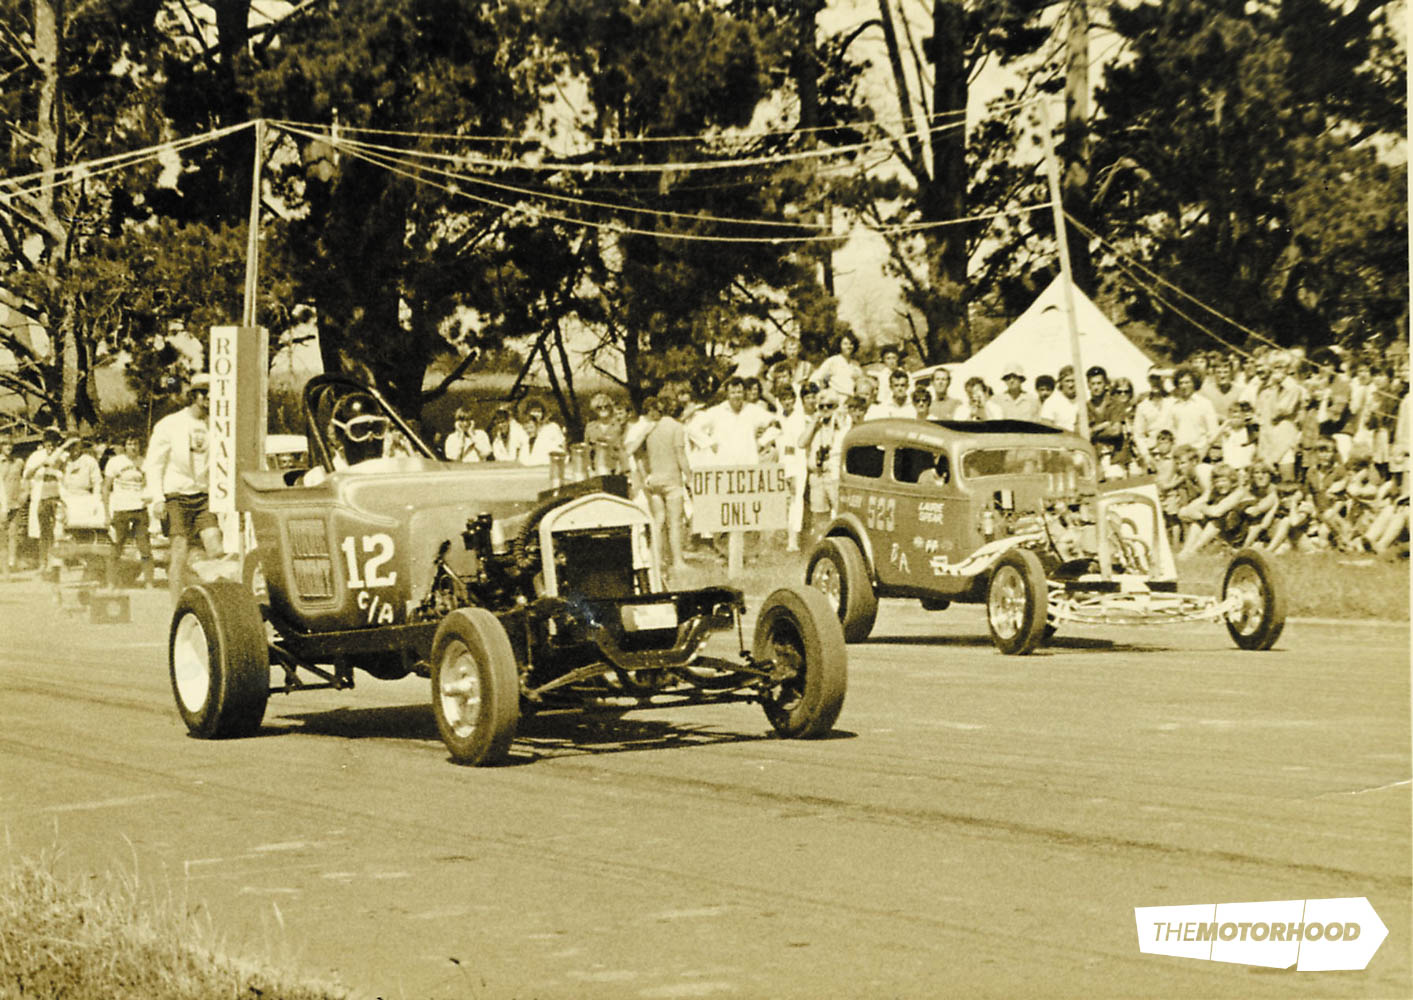 Kerrs Road, Wiri, South Auckland; Owen Campbell has the jump in his GMC six–powered T-bucket ('Junior Jimmy') over Dave McDougall's 292ci Ford V8–powered Austin (Photo: Peter Lodge collection)